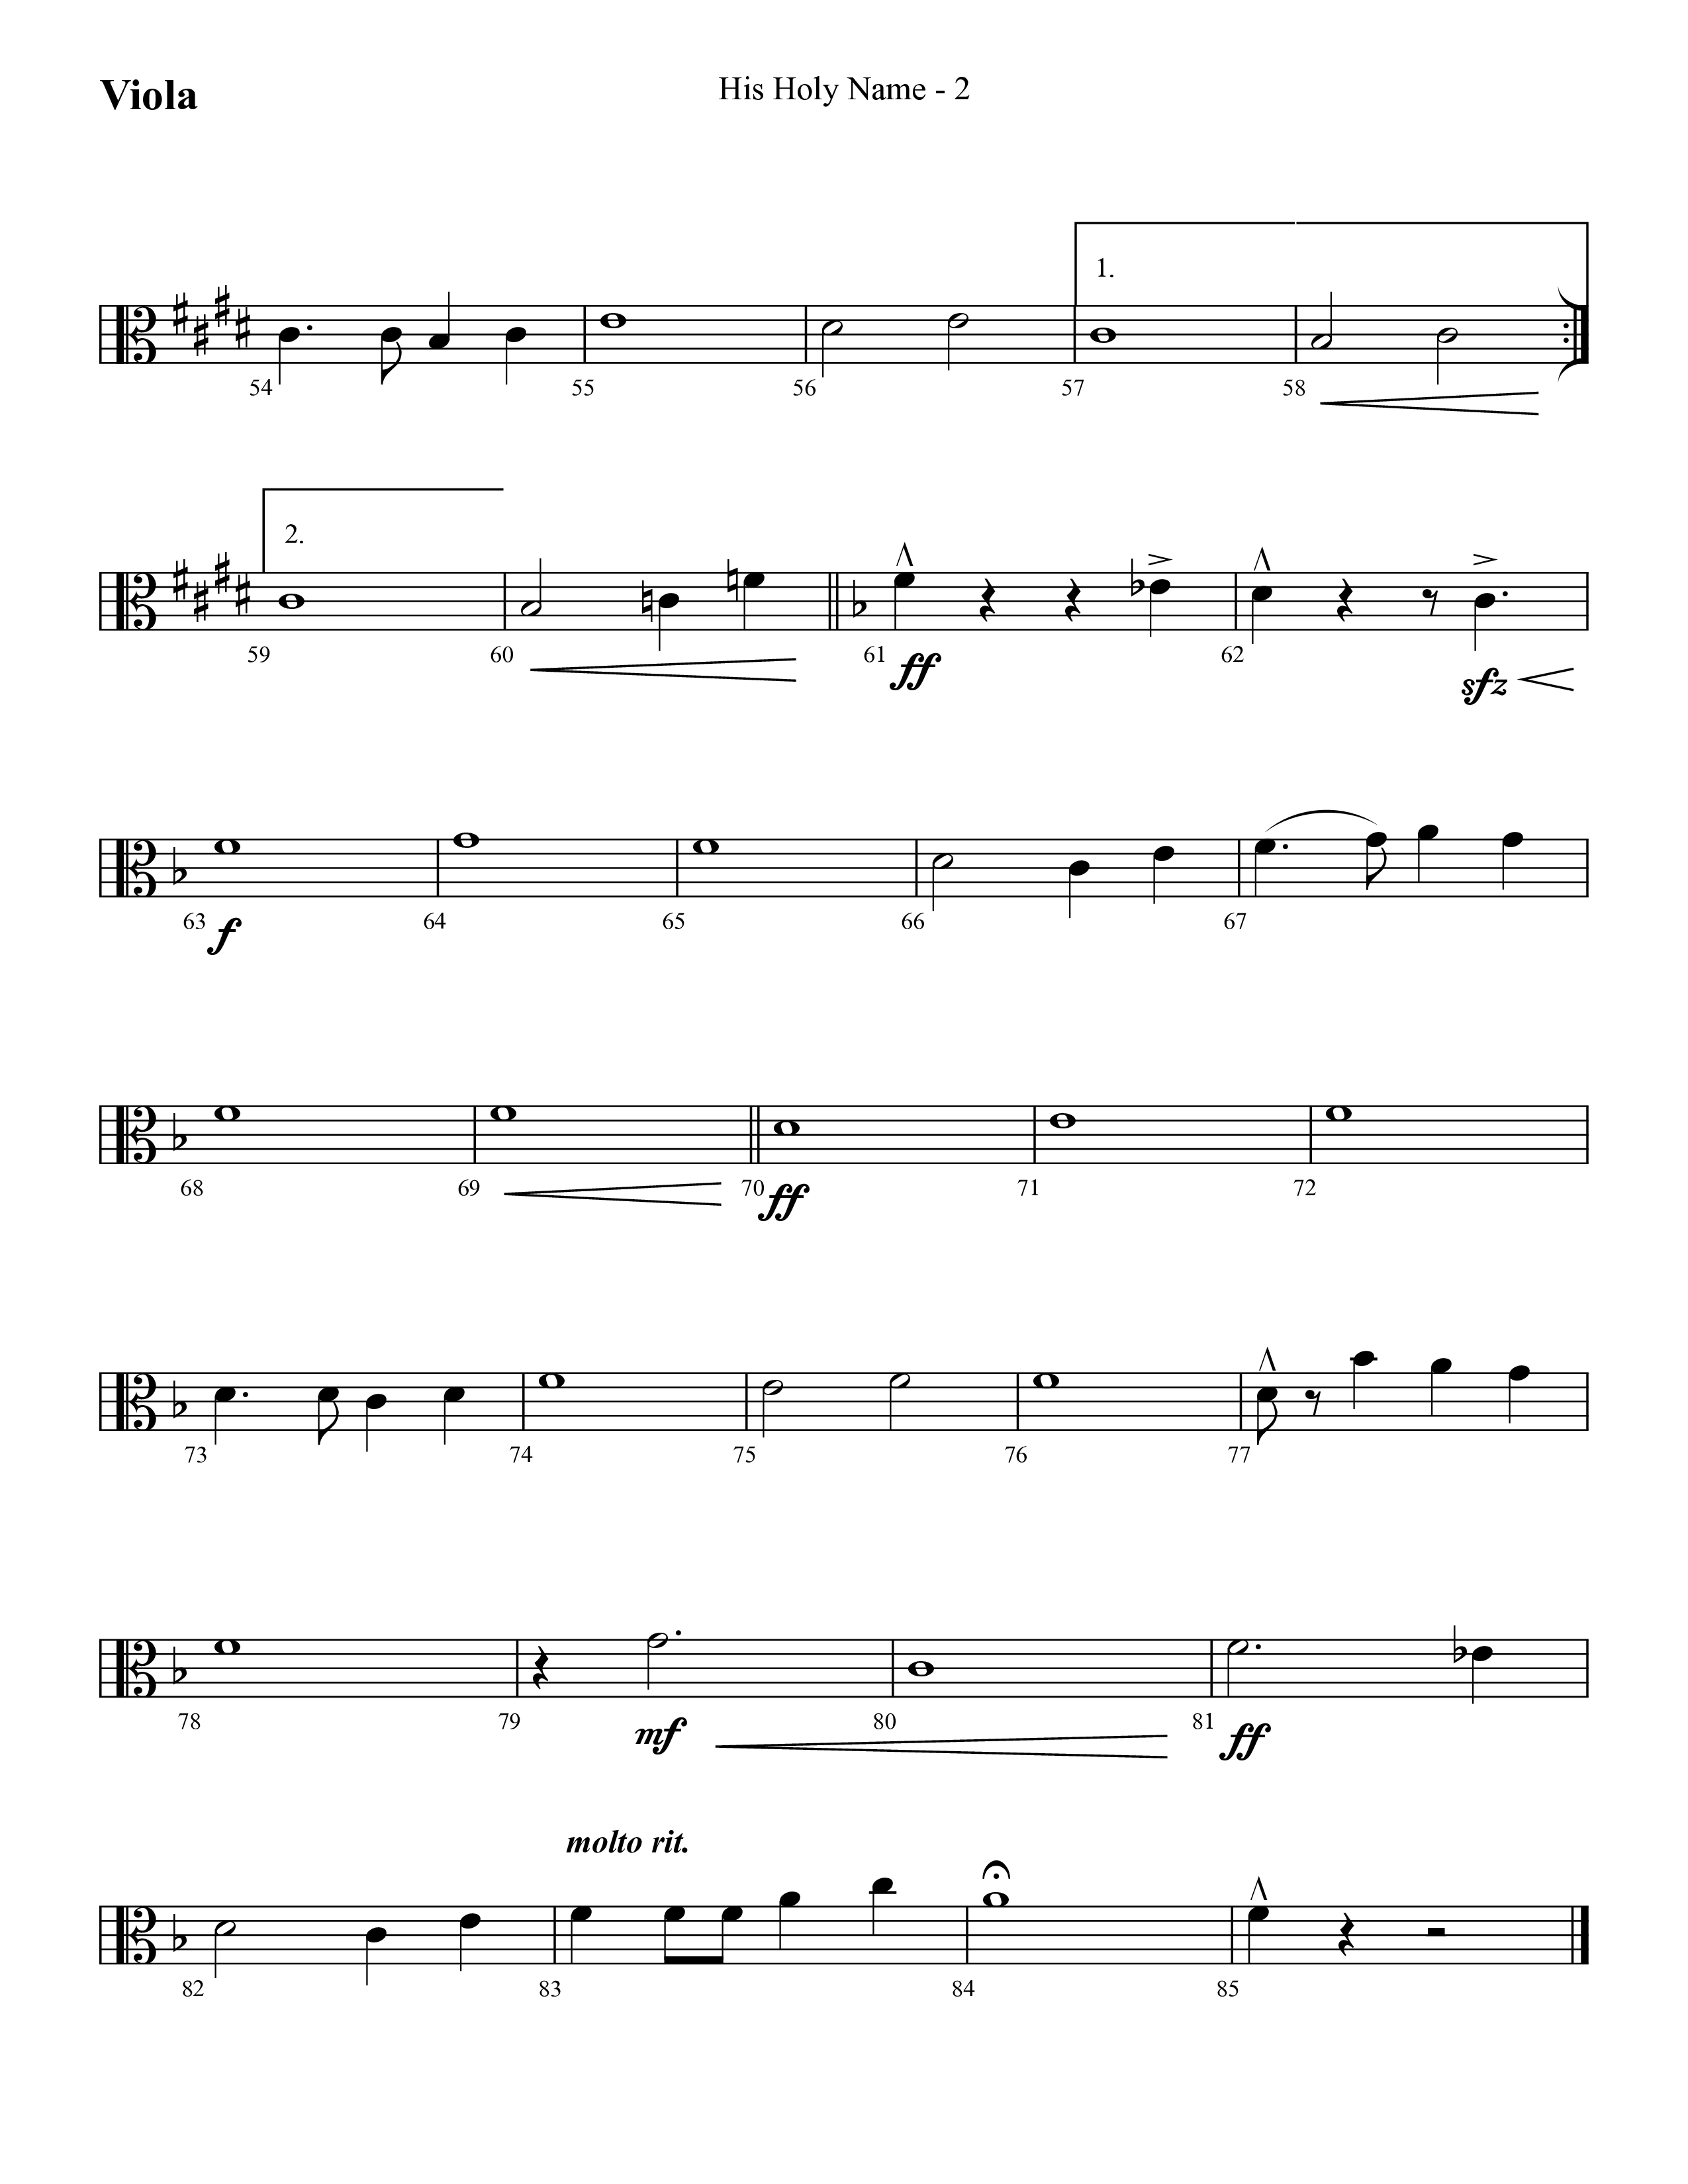 His Holy Name (with Blessed Be The Name) (Choral Anthem SATB) Viola (Lifeway Choral / Arr. Cliff Duren)